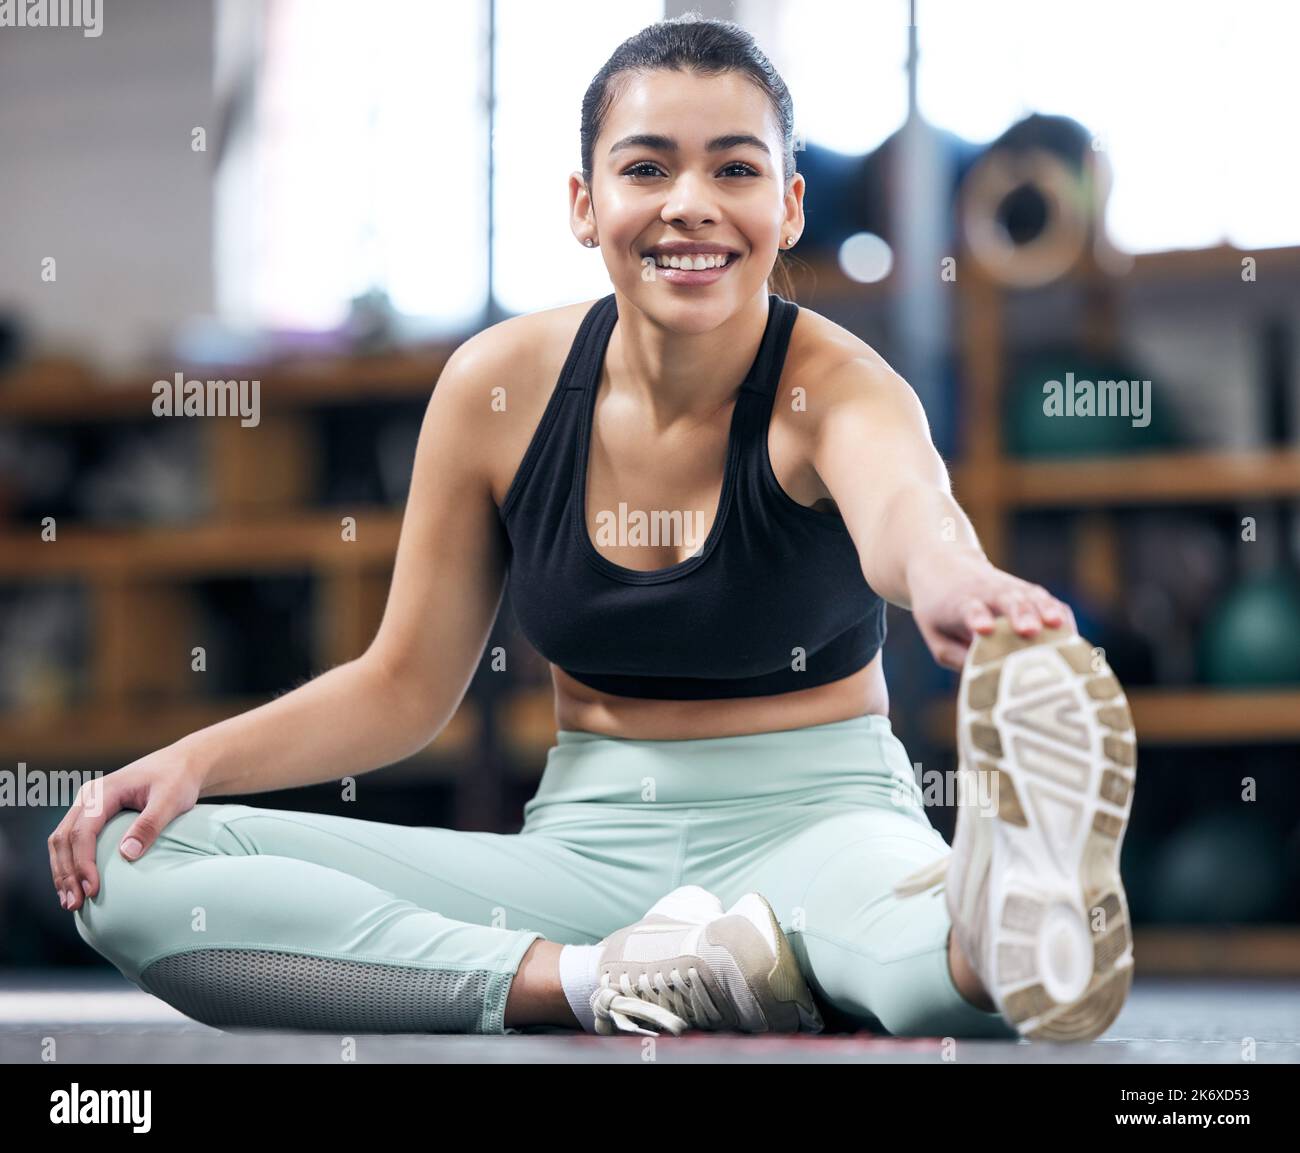 The warmup is half of the workout. Portrait of a fit young woman stretching in a gym. Stock Photo